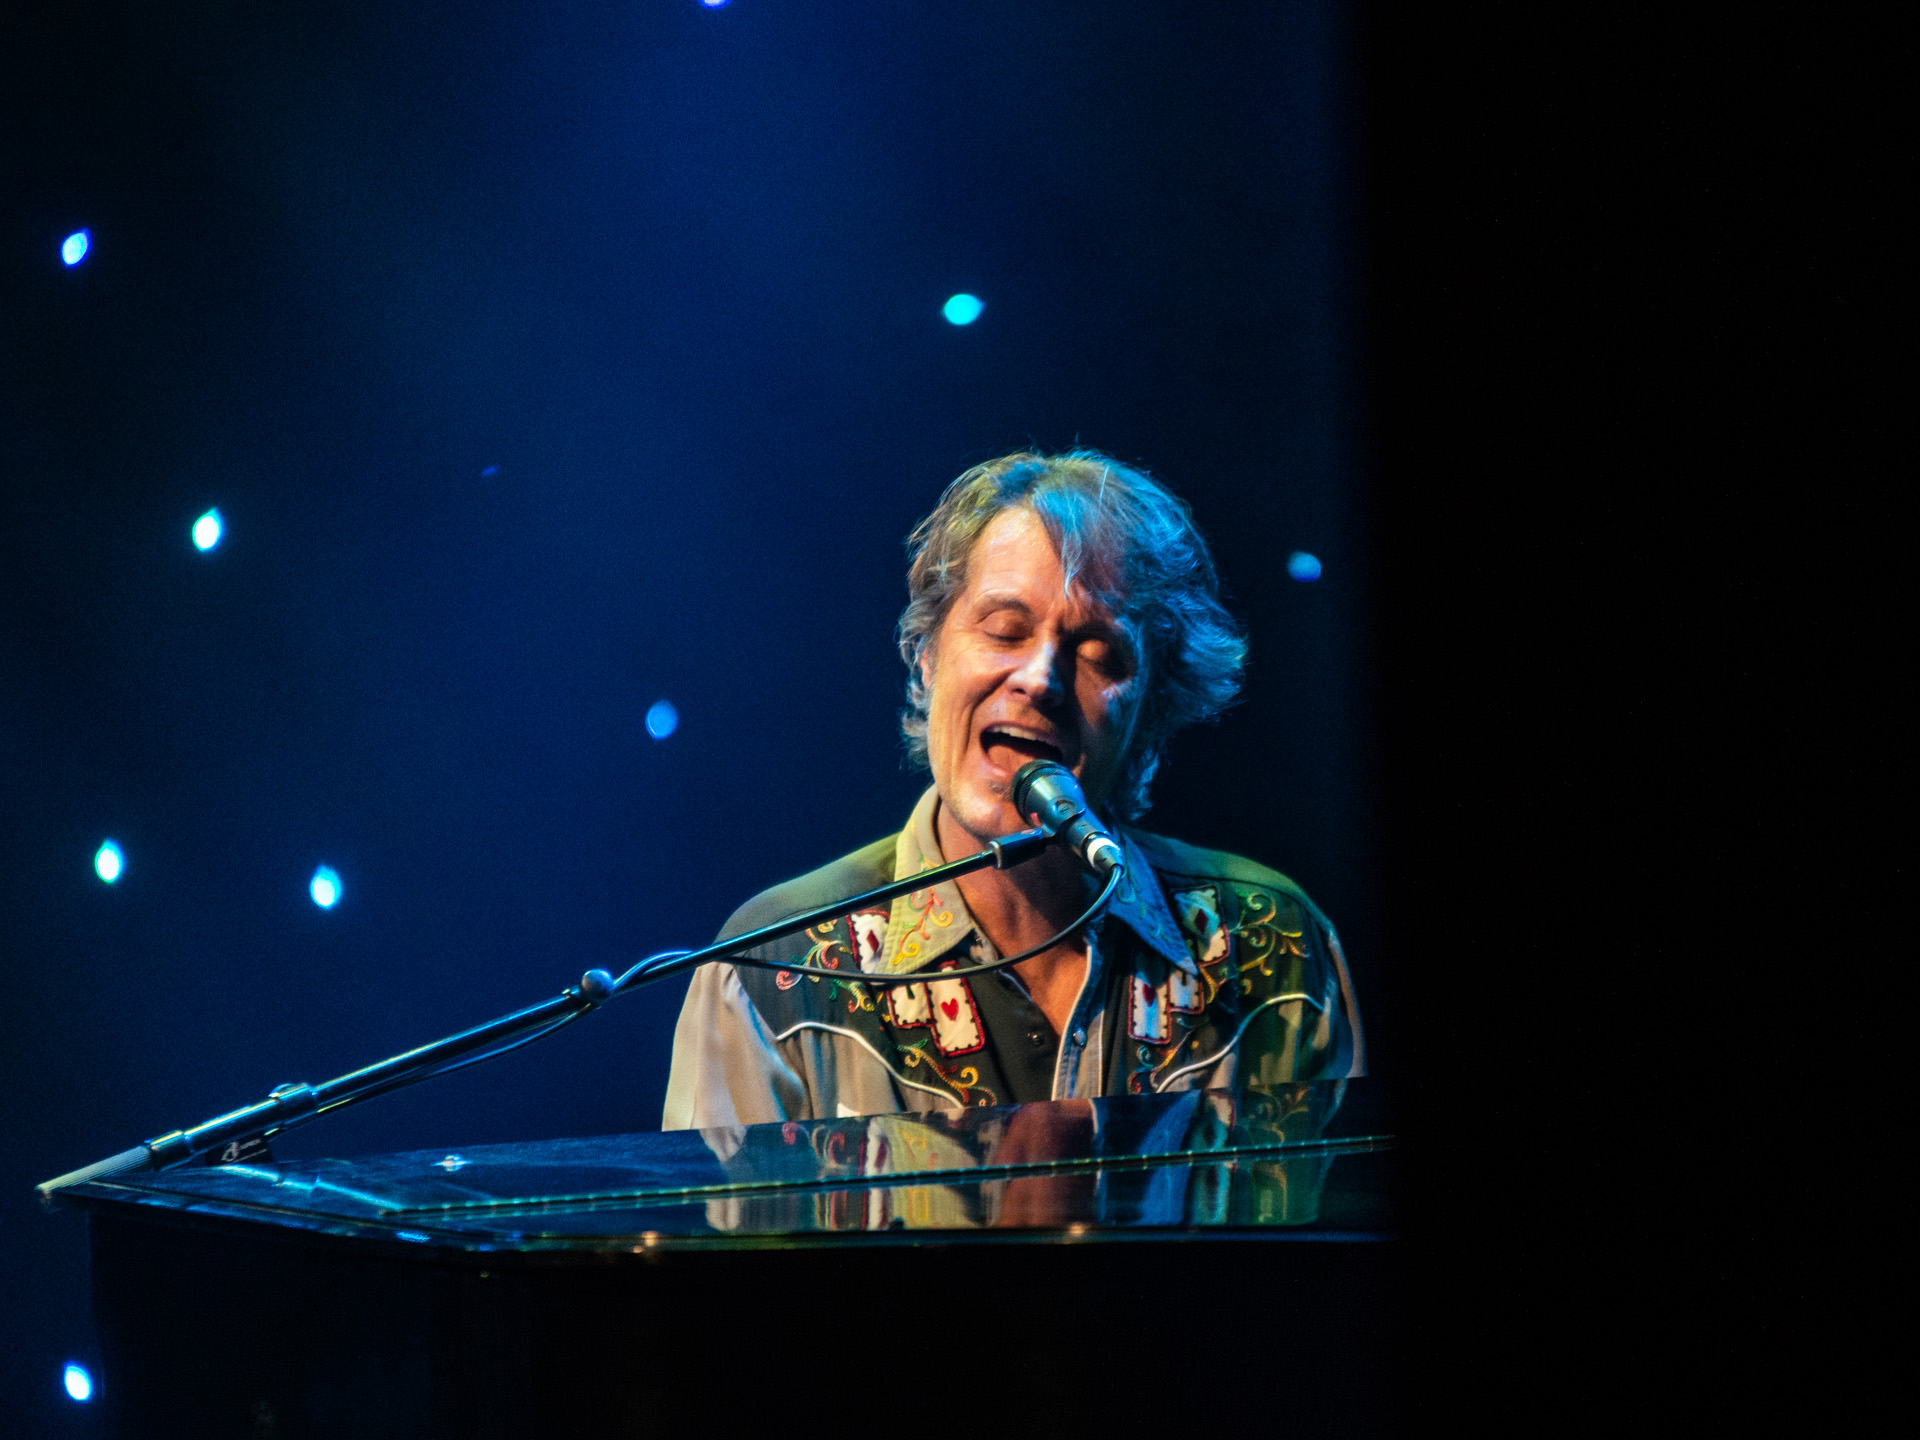 Jim Cuddy captivates the audience as he sings into the microphone while skillfully playing the piano. Behind him, a mesmerizing display of globes of lights adds a touch of magic to the stage, creating a visually enchanting atmosphere for his performance.